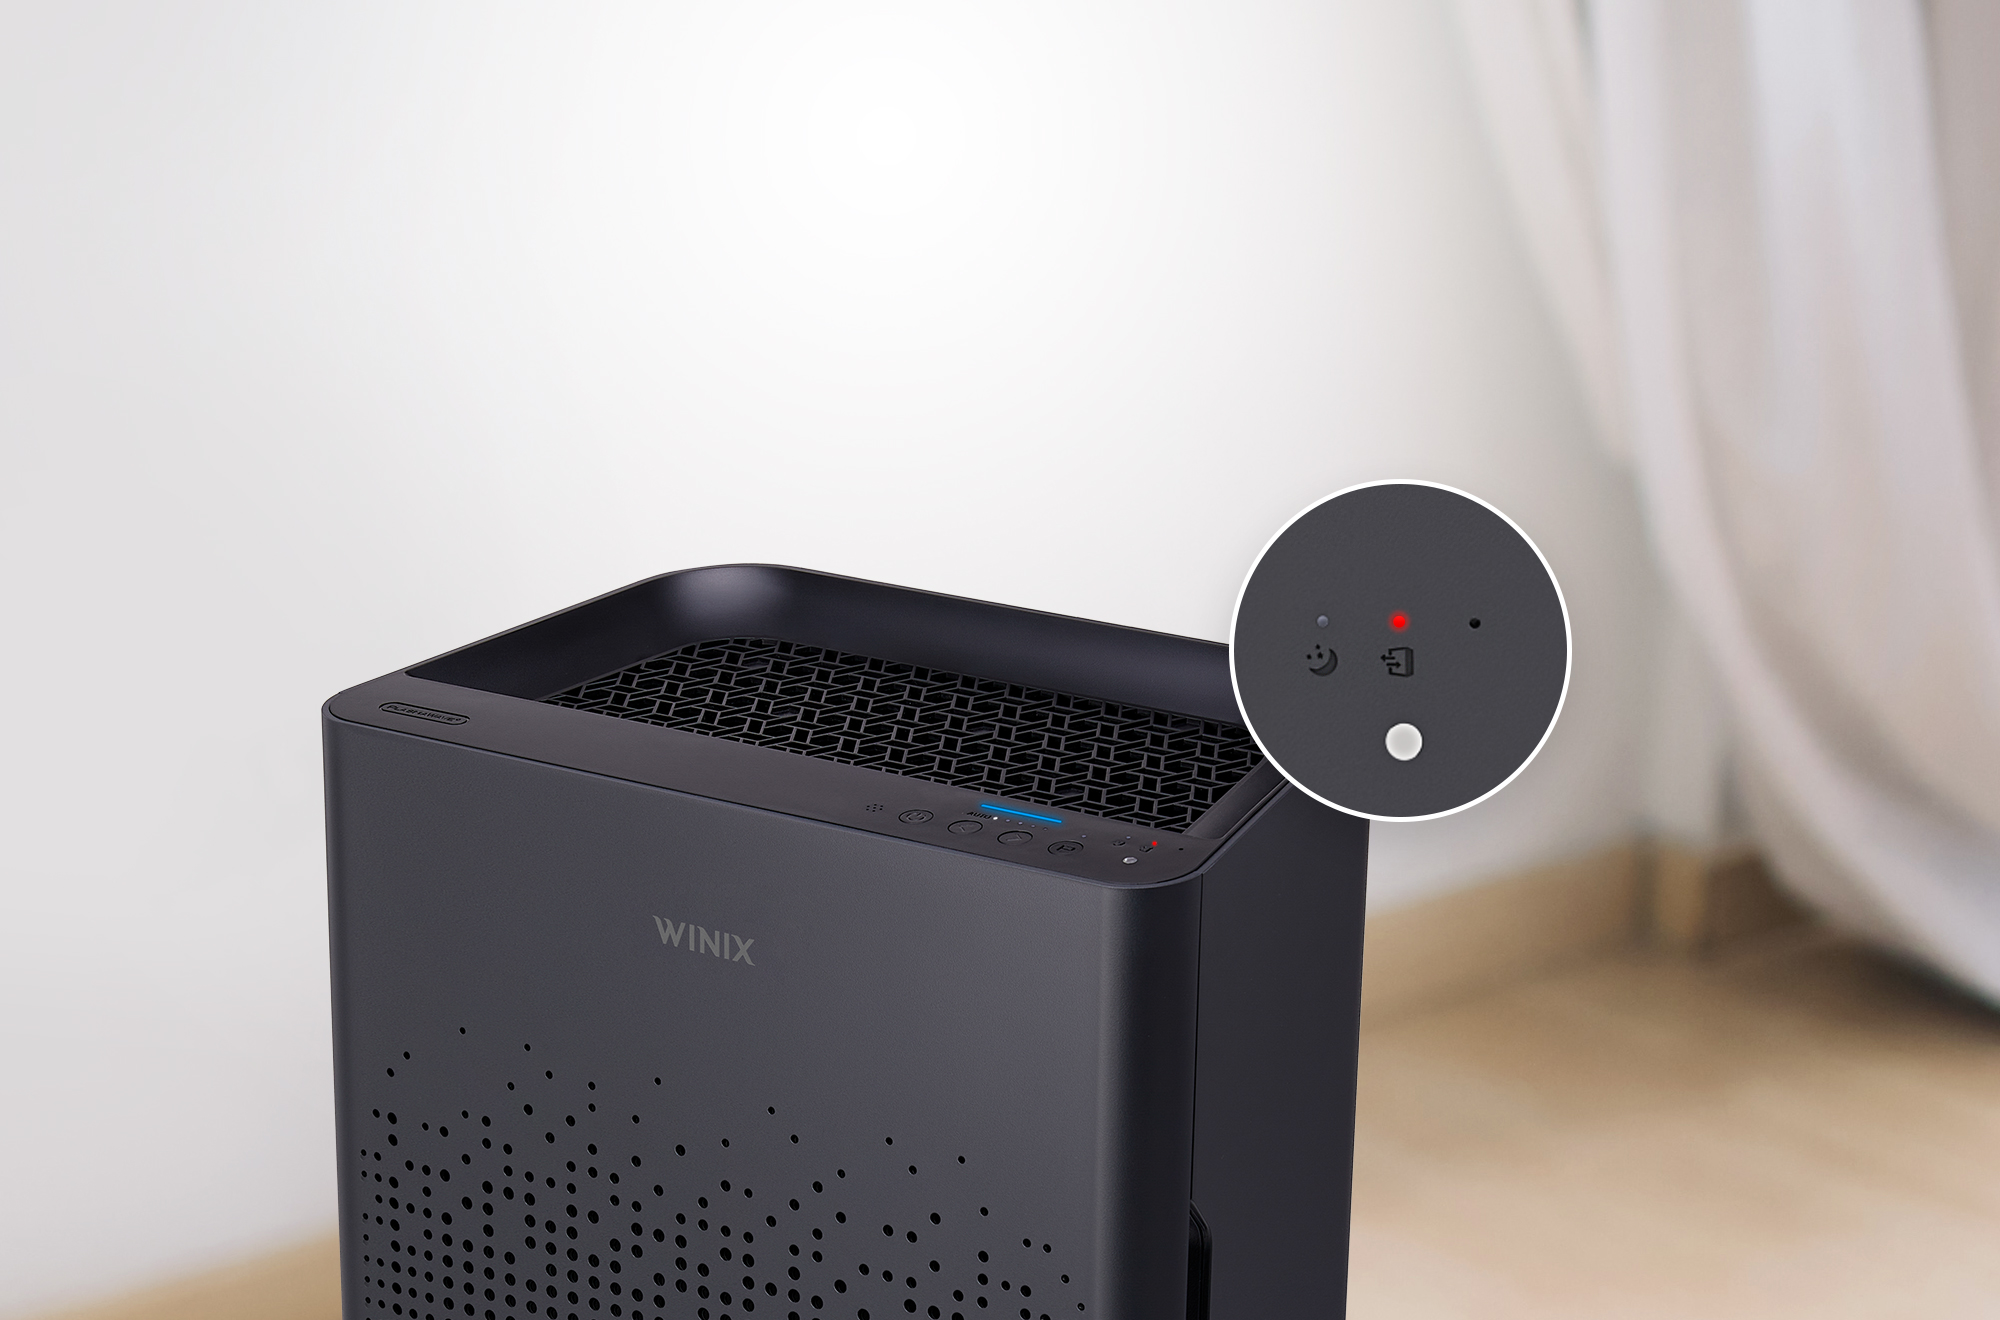 AM80 Air Purifier is easy to use and will let you know when it's time to replace the filters